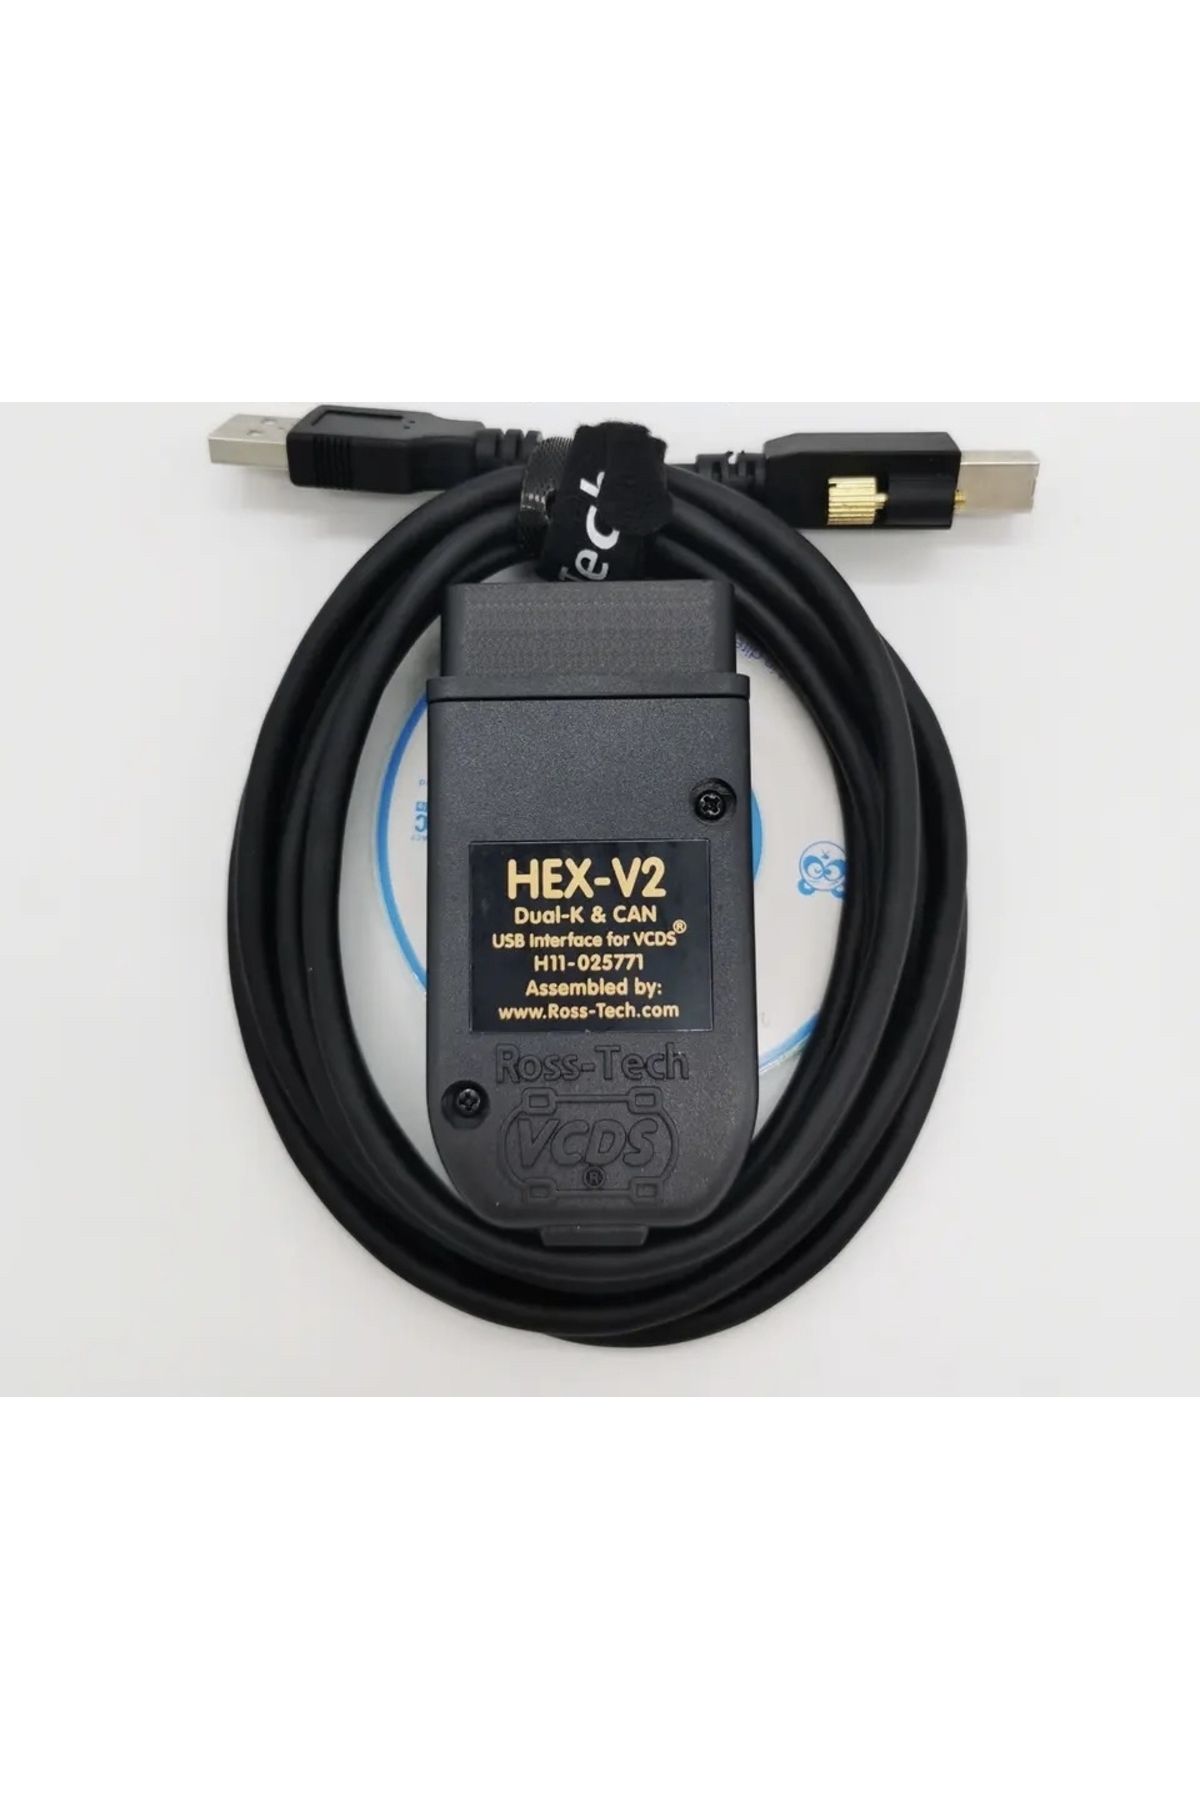 VCDS with HEX-V2 Enthusiast - USB Interface (10 VINs) - VCHV2_10